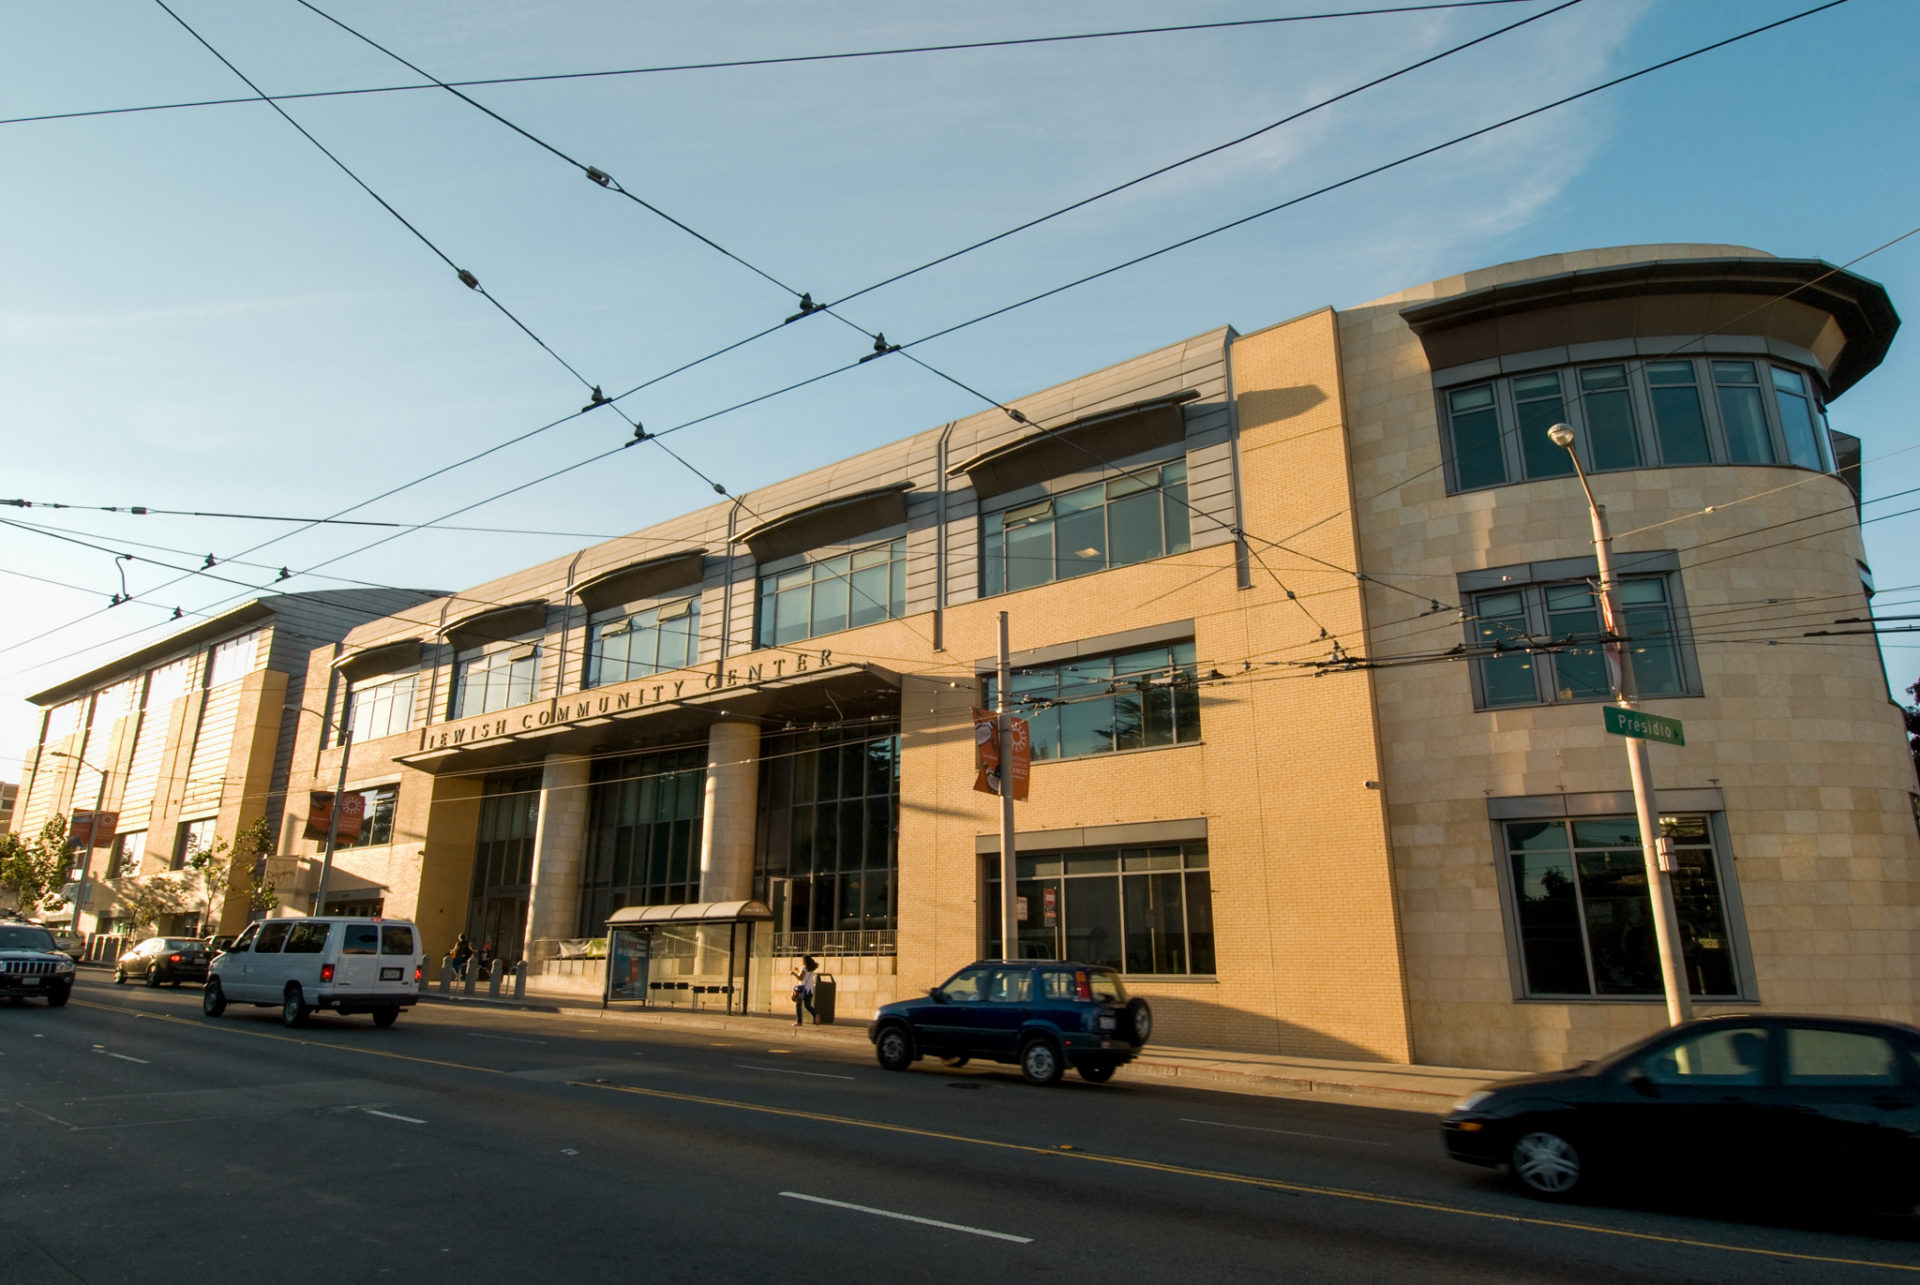 picture of the JCCSF from the outside. It is a large, 3 story building that is beige with many windows